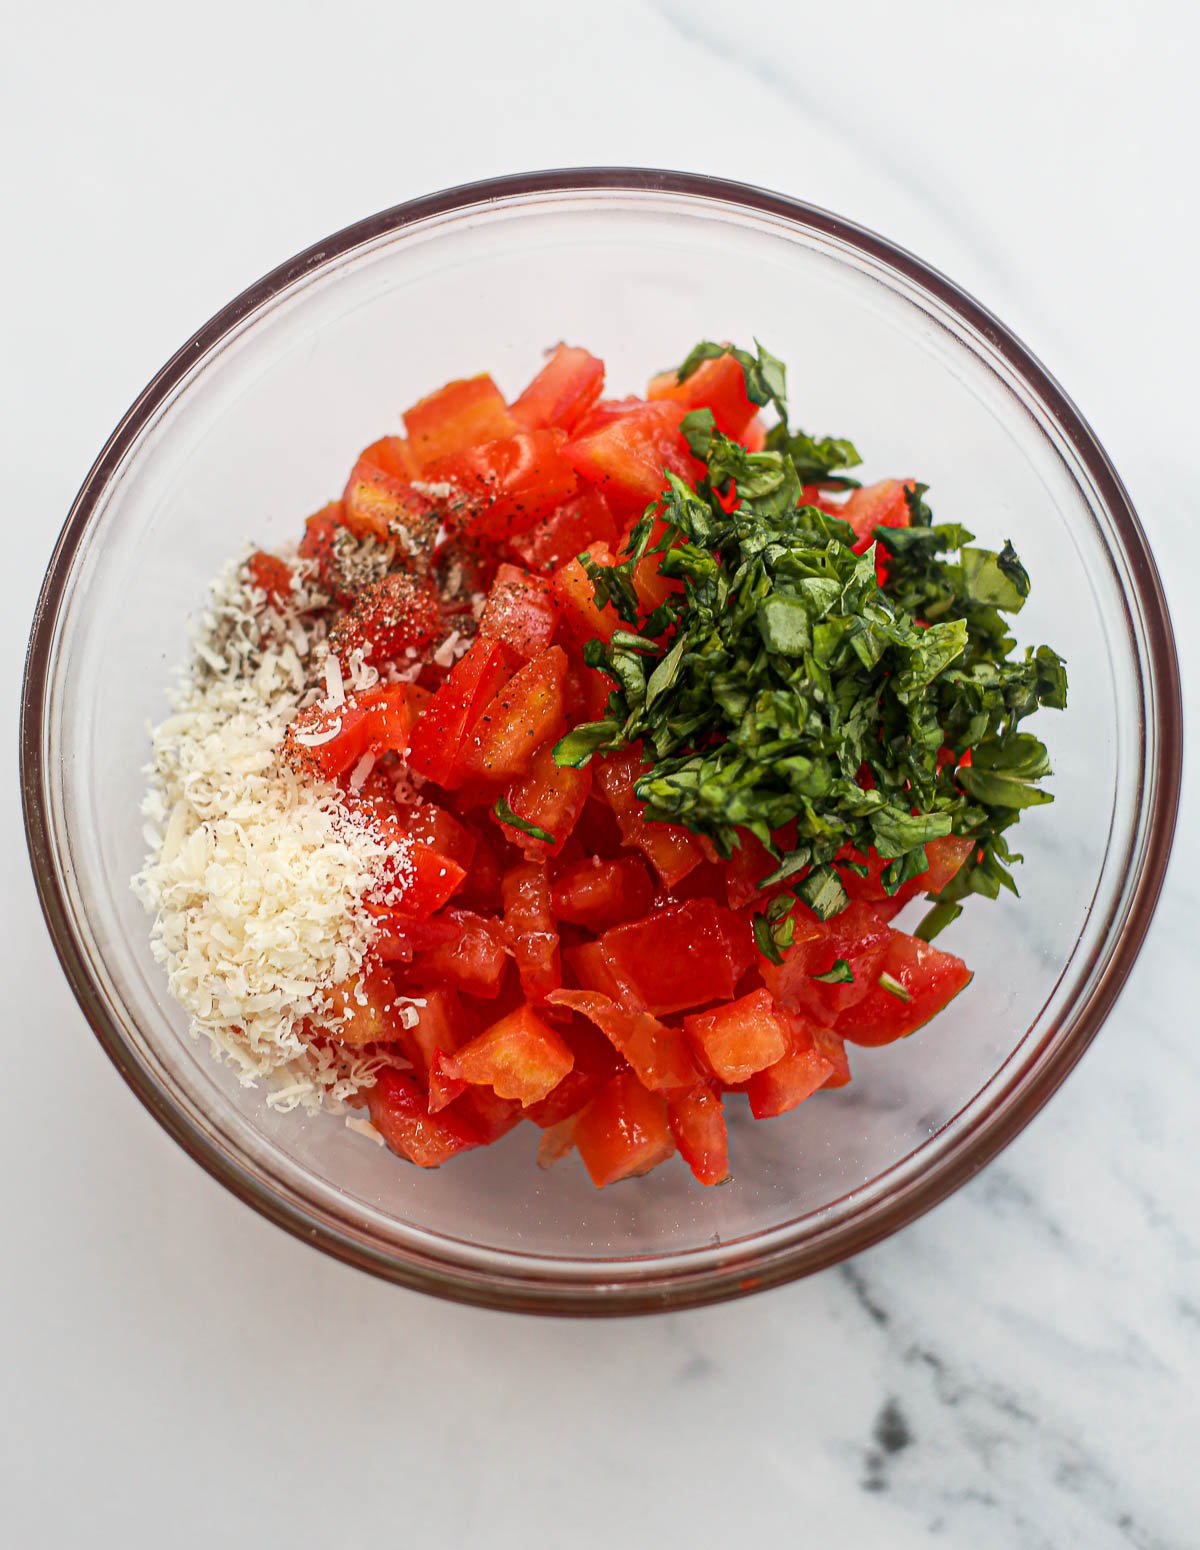 Bruschetta ingredients in a bowl before mixing.